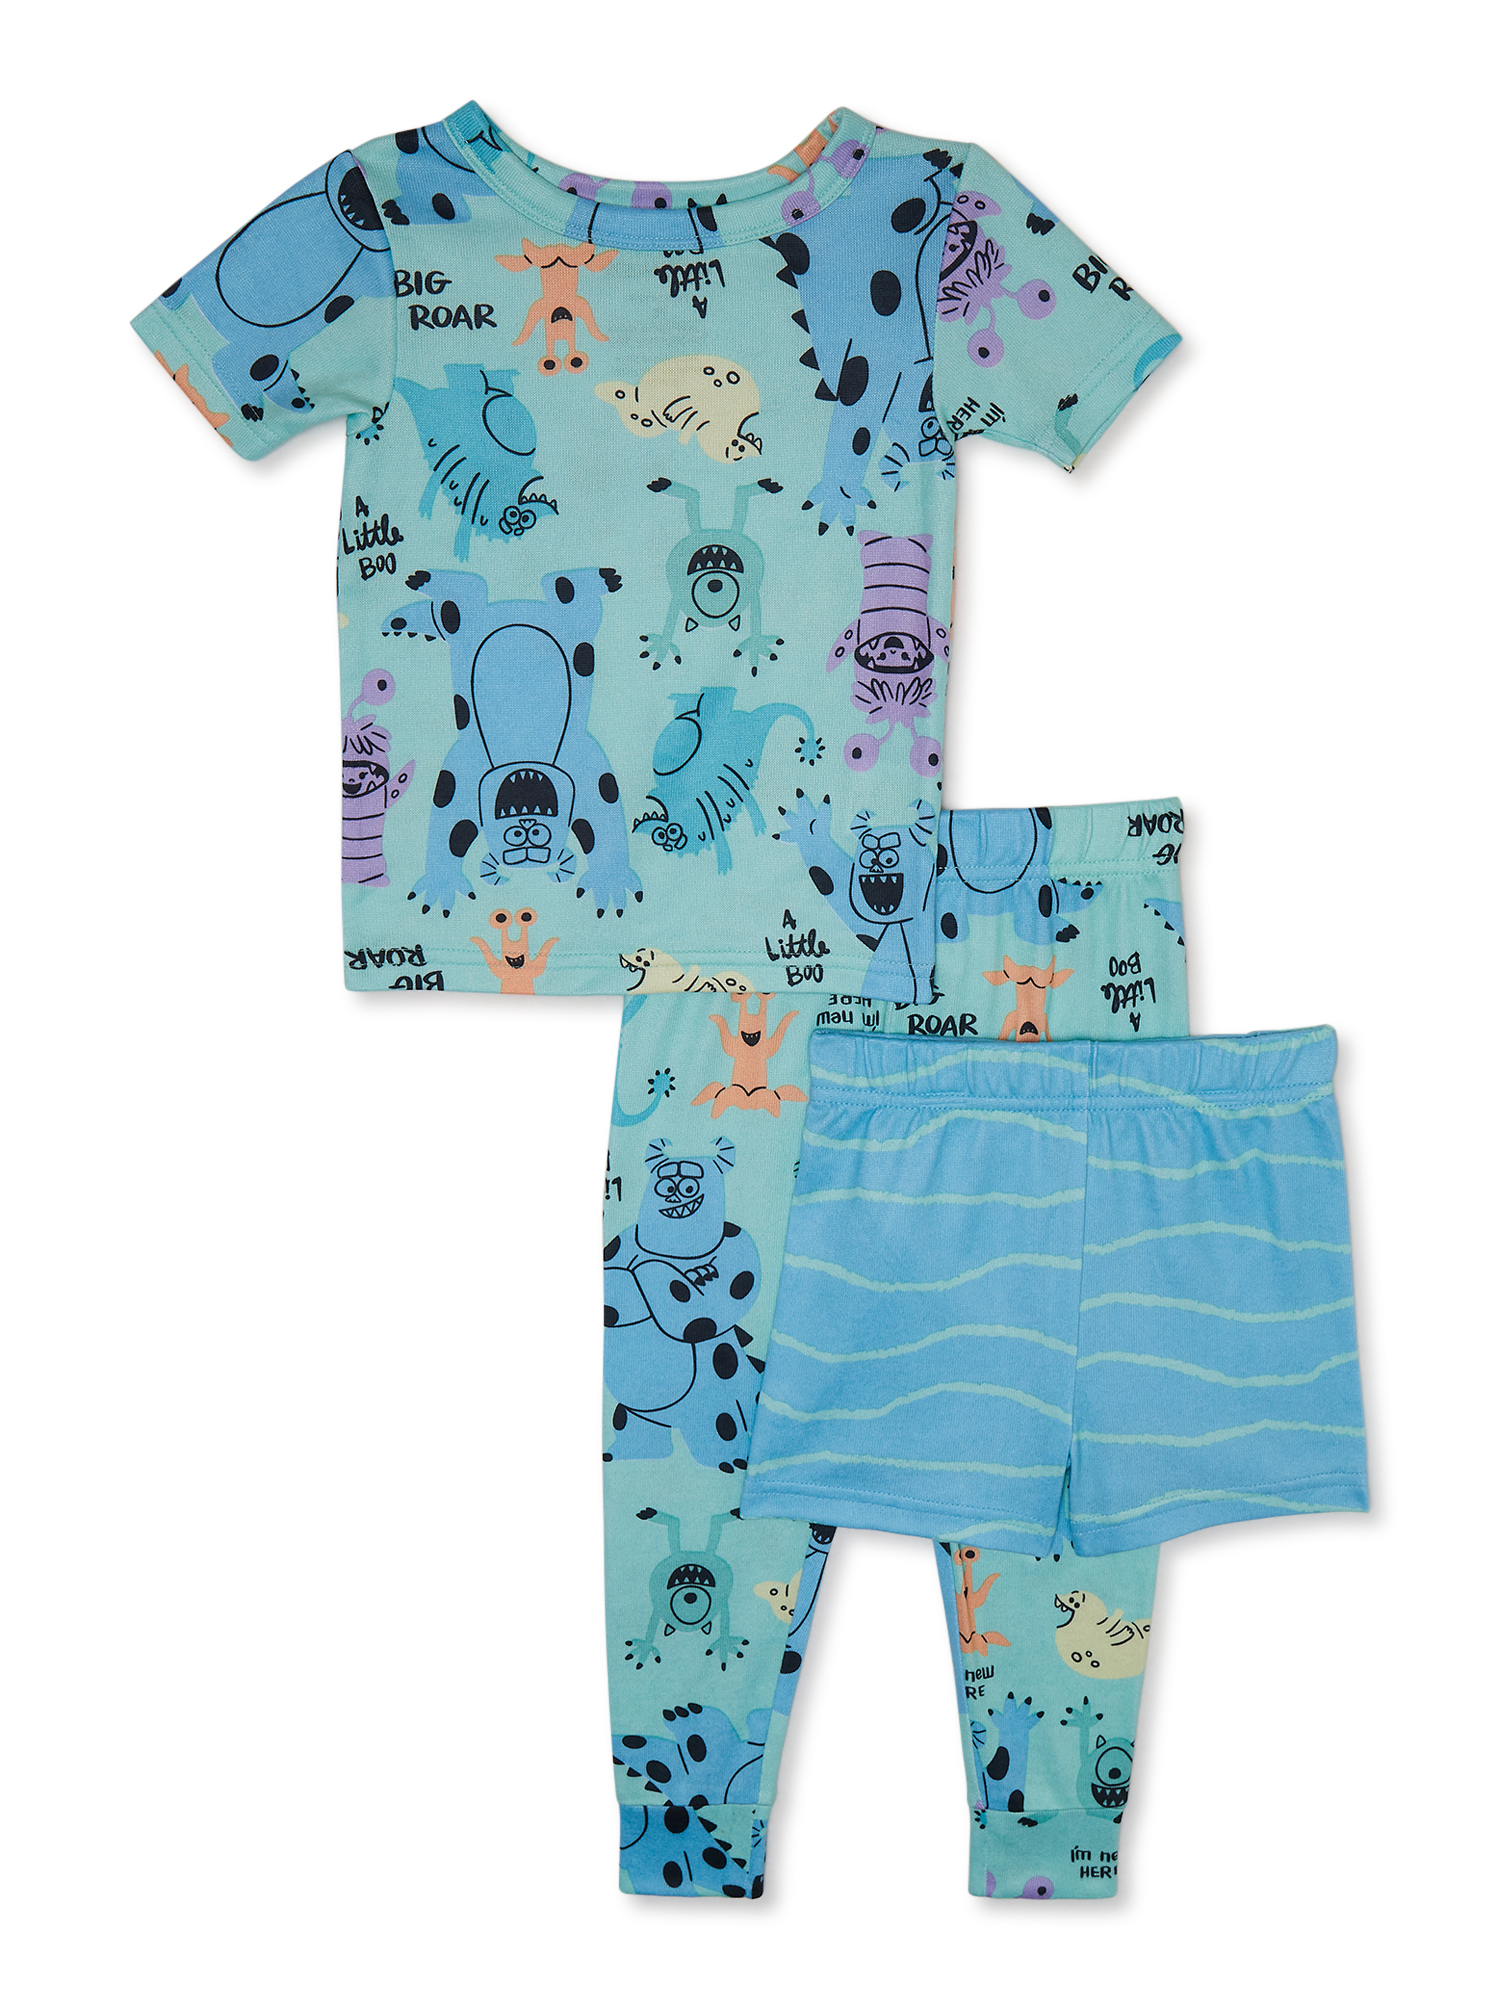 Character Toddler Boy Top, Pants and Shorts Pajama Set, 3-Piece, Sizes 12m-5t